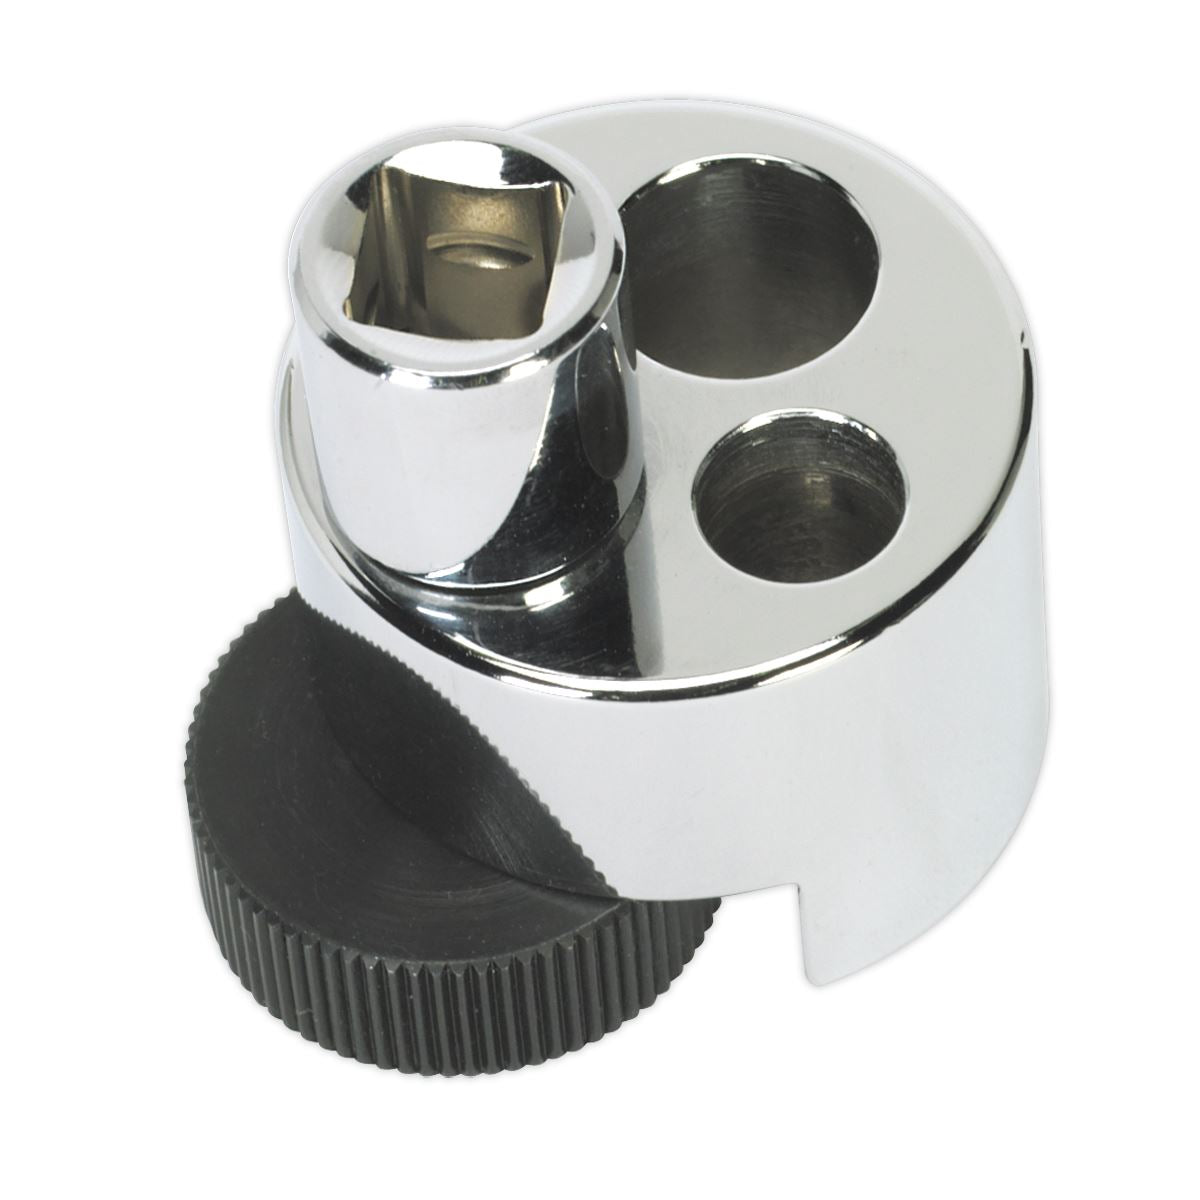 Sealey 8-19mm 1/2" Drive Stud Remover and Installer